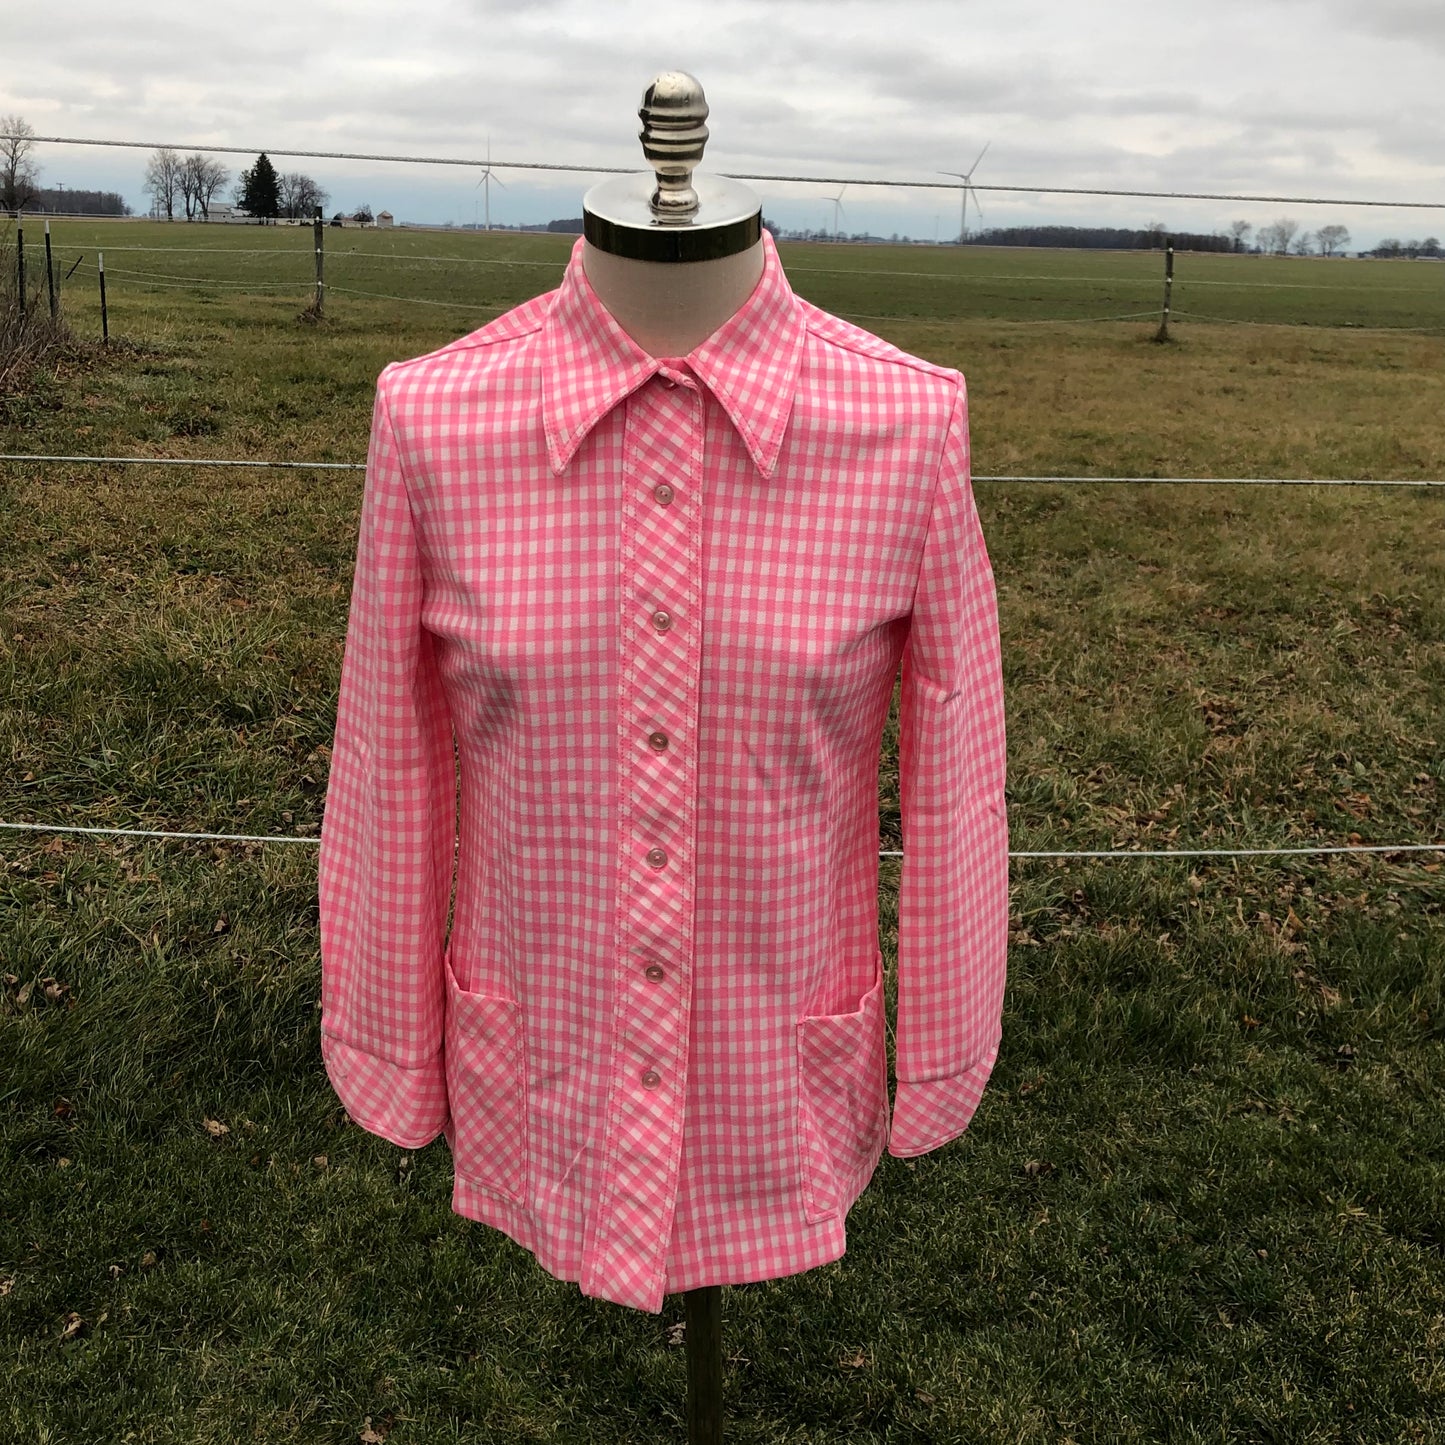 70’s Vintage Women’s Bubble Gum Pink and White Gingham Polyester Shirt with Pockets